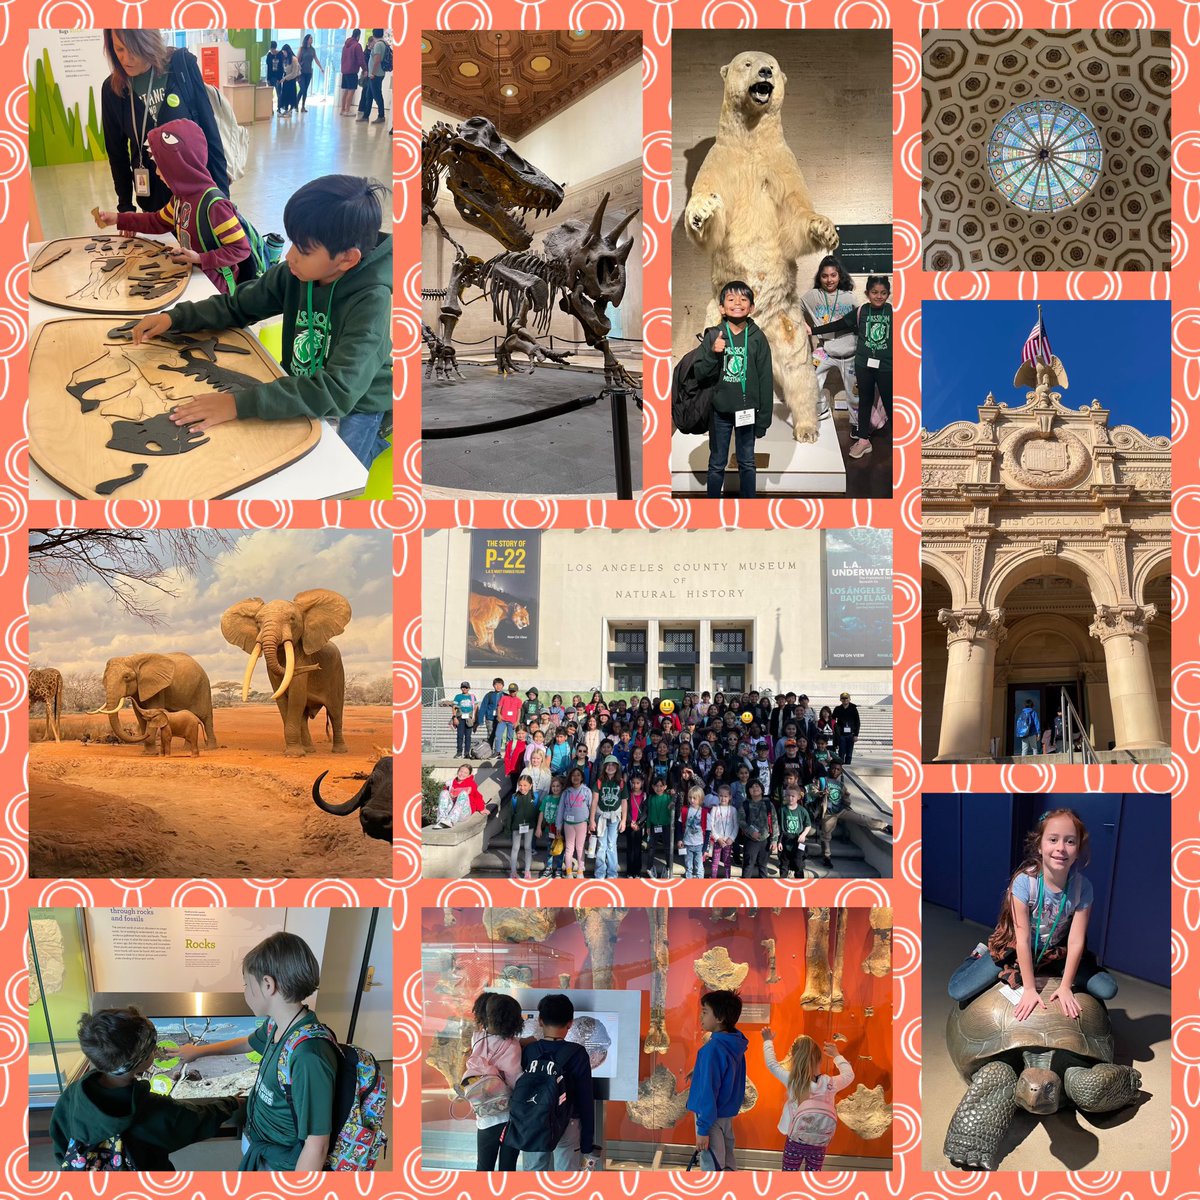 @mission_rusd #ELOP enjoyed a day of discovery & learning at the Natural History Museum & CA Science Center. Dinos, fossils, African mammals, North American mammals, history, science, & so much more! 🔍🚌What a great Saturday! @RedlandsUSD @RedlandsUSDSupt